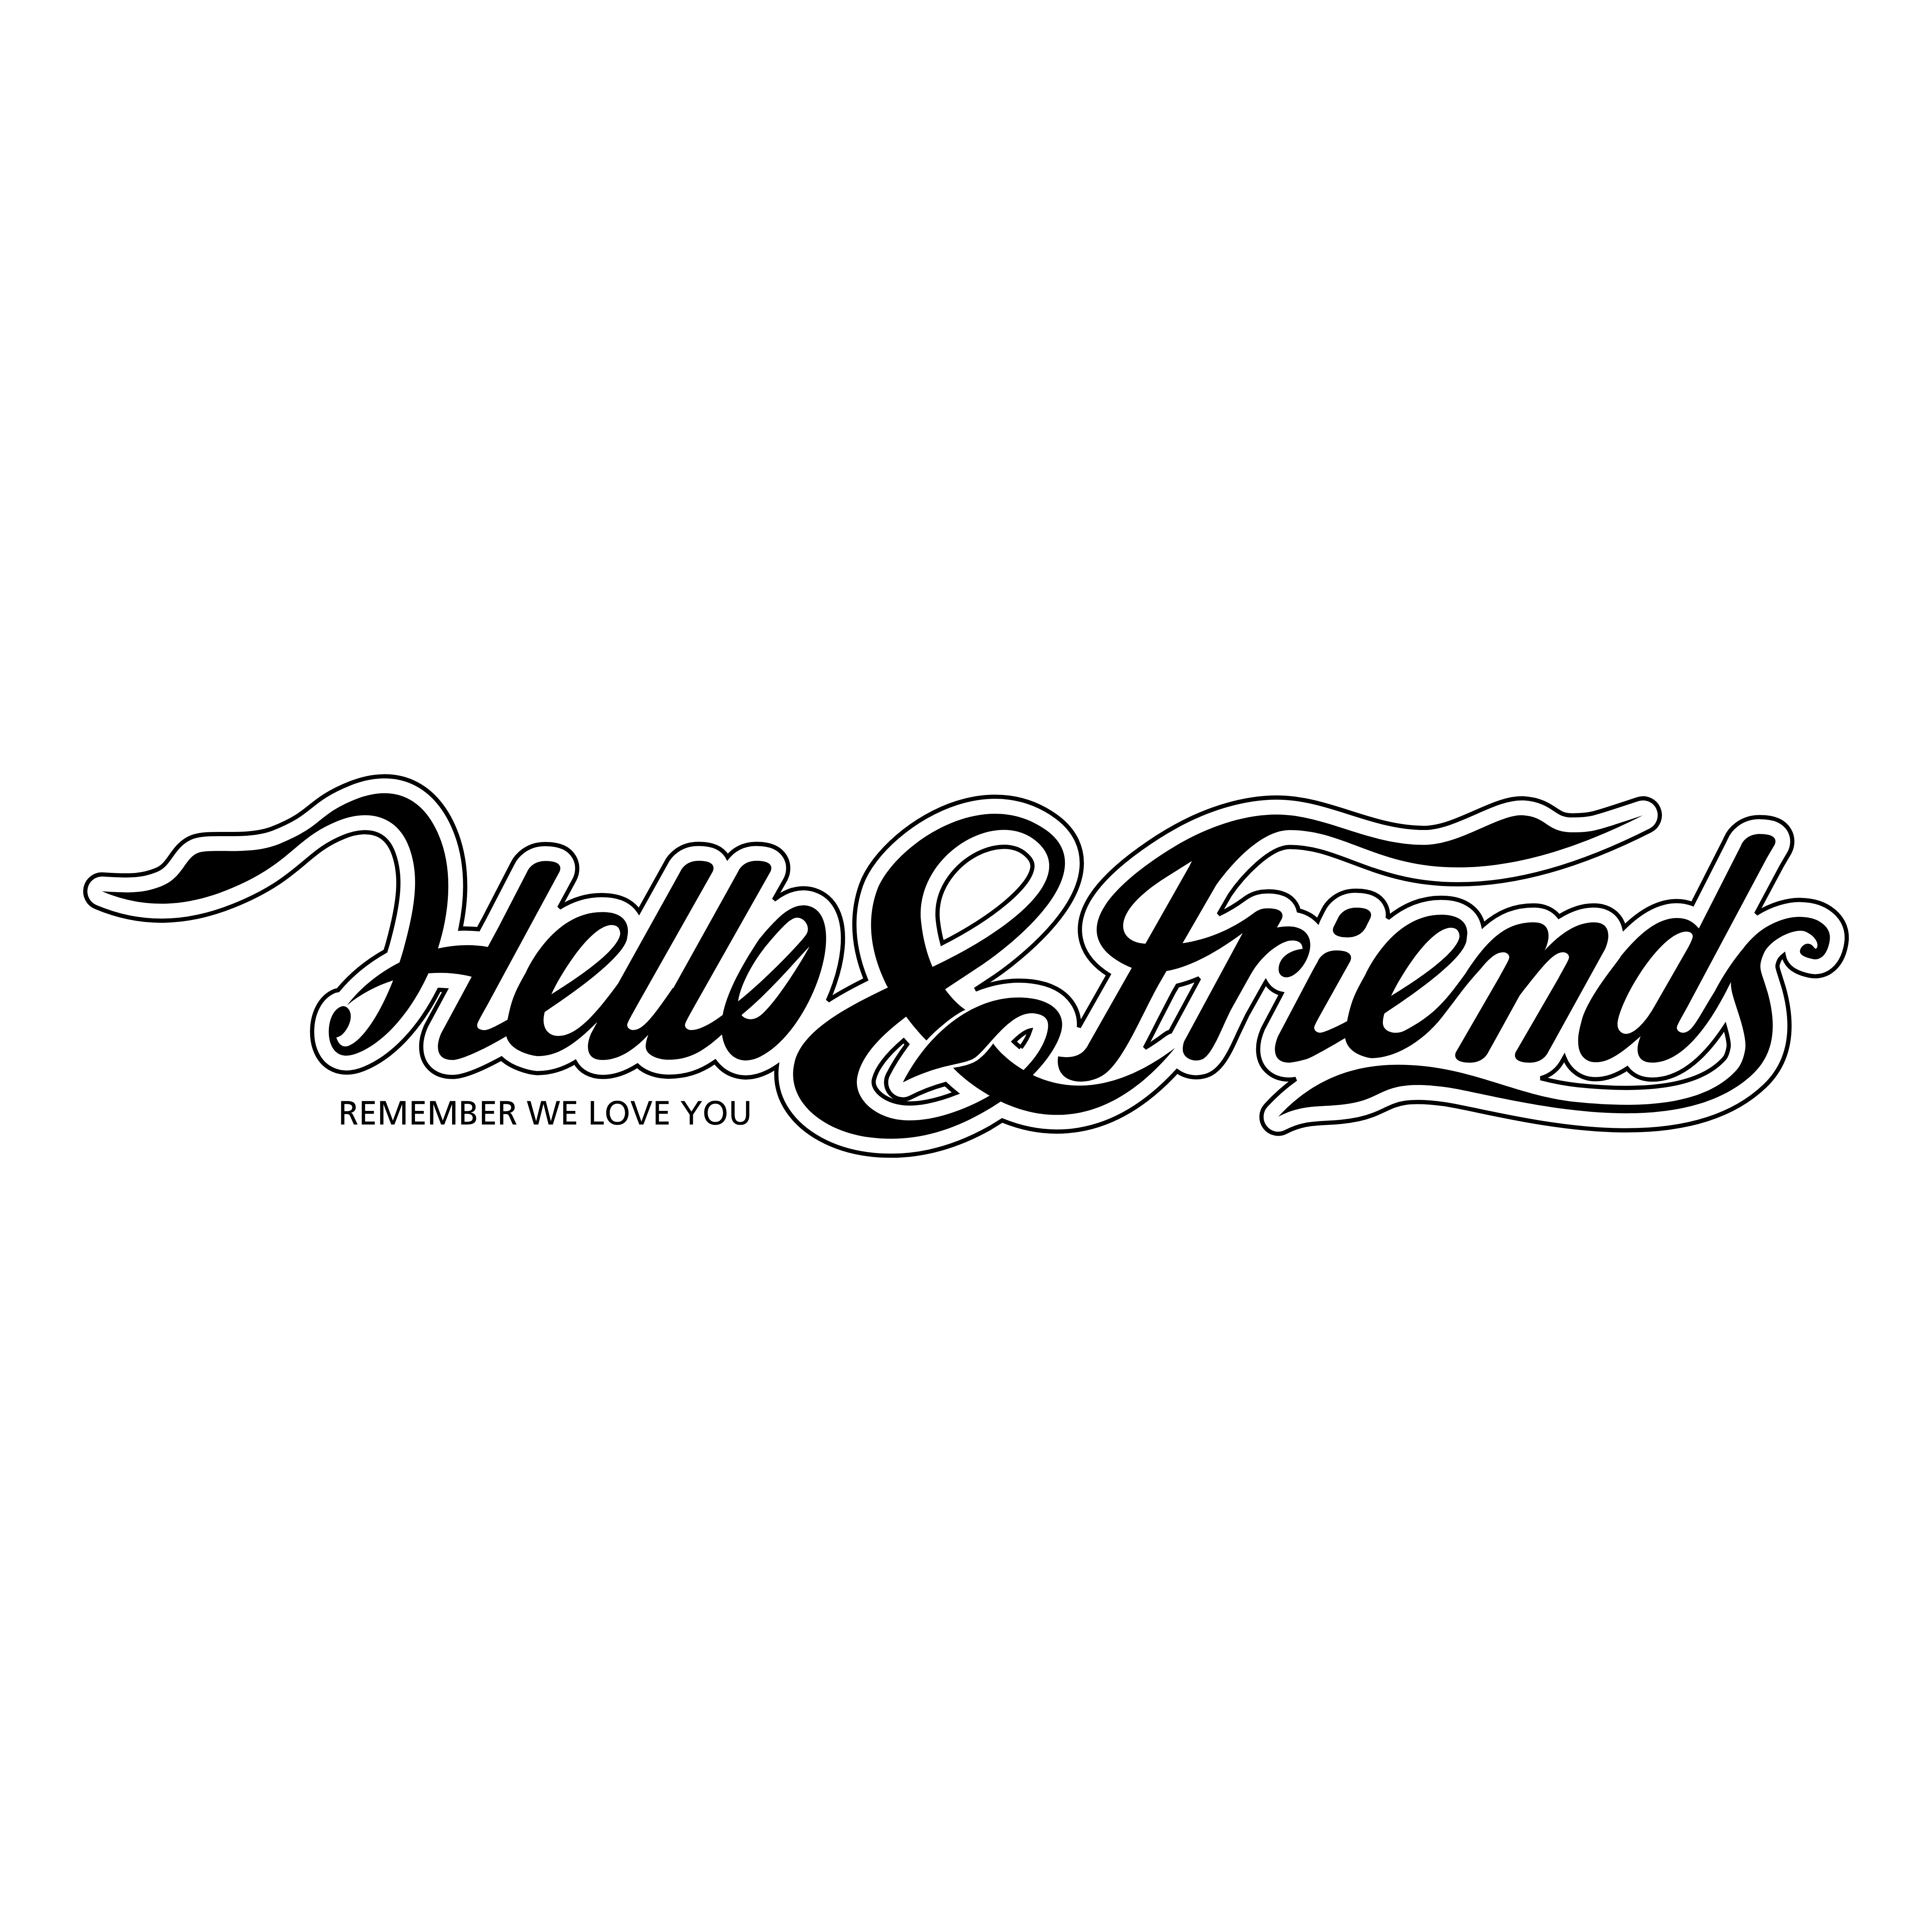 Hello and Friends - Logos Download